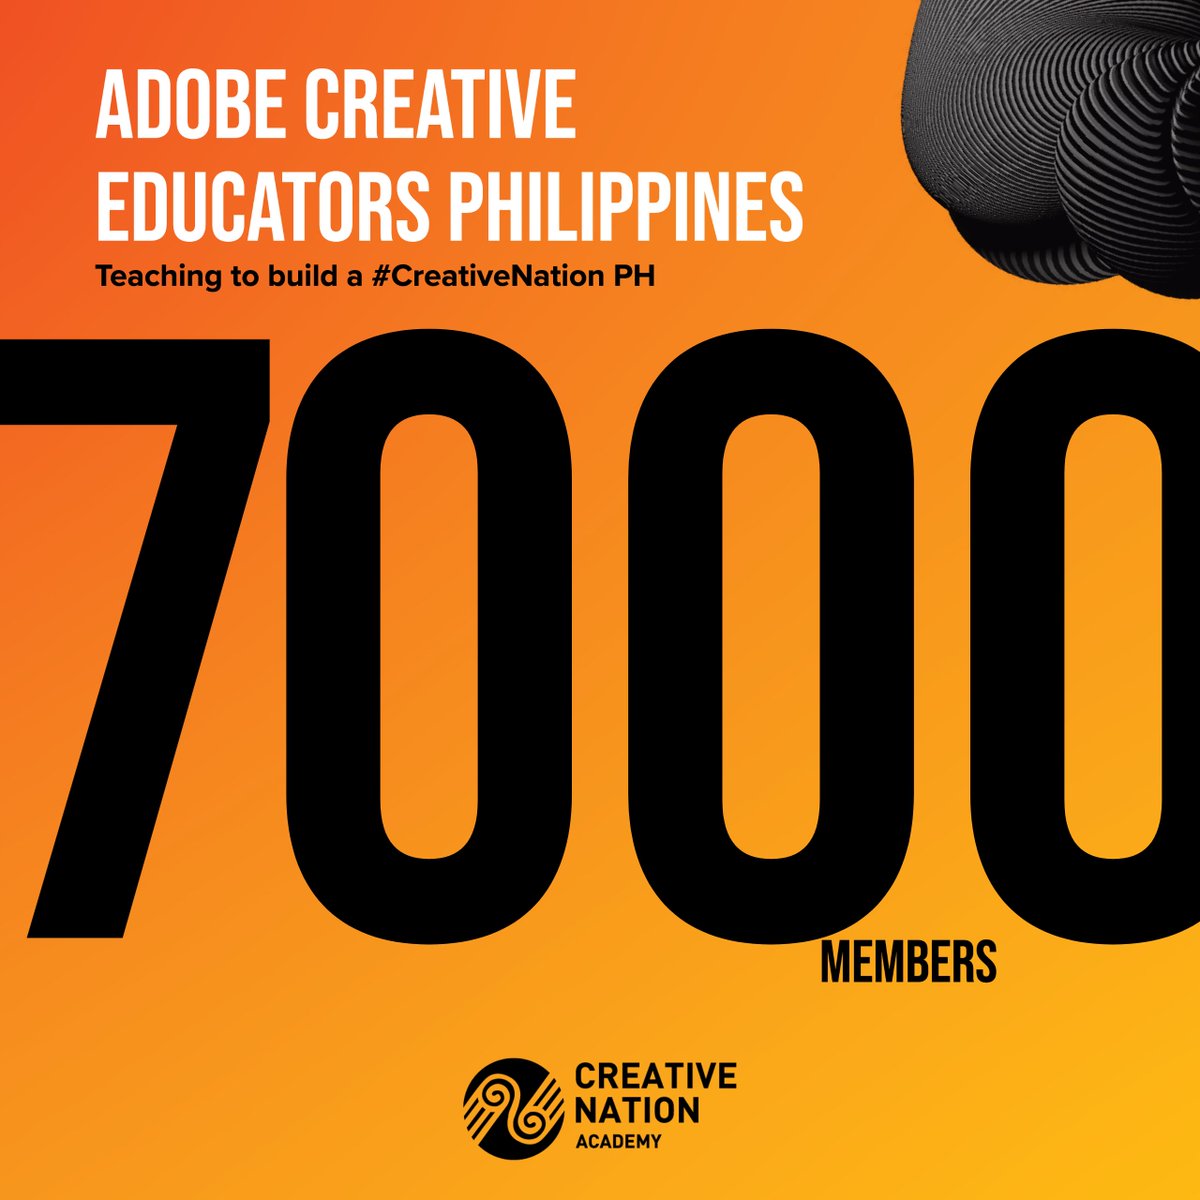 Thank you 7000 times! Adobe Creative Educators Philippines has reached this success because of all of you. 

Lets build that #creativenationph for we are #bettertogether
#ccevangelistph #FatherACEPH #adobeeducreative